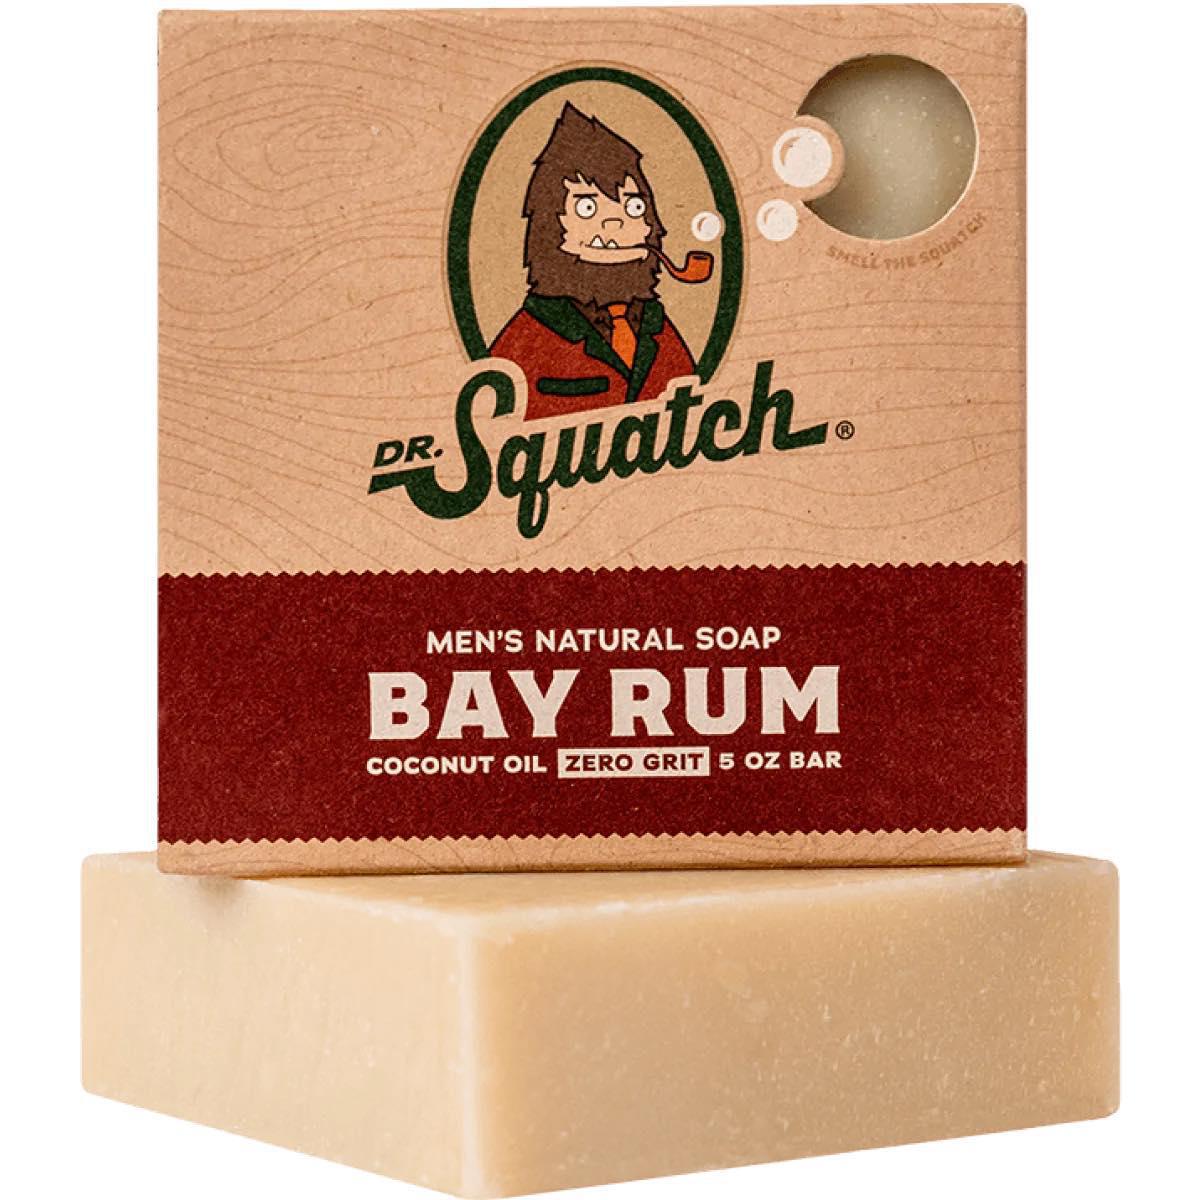 Finally– The cologne you asked us for - Dr. Squatch Soap Co